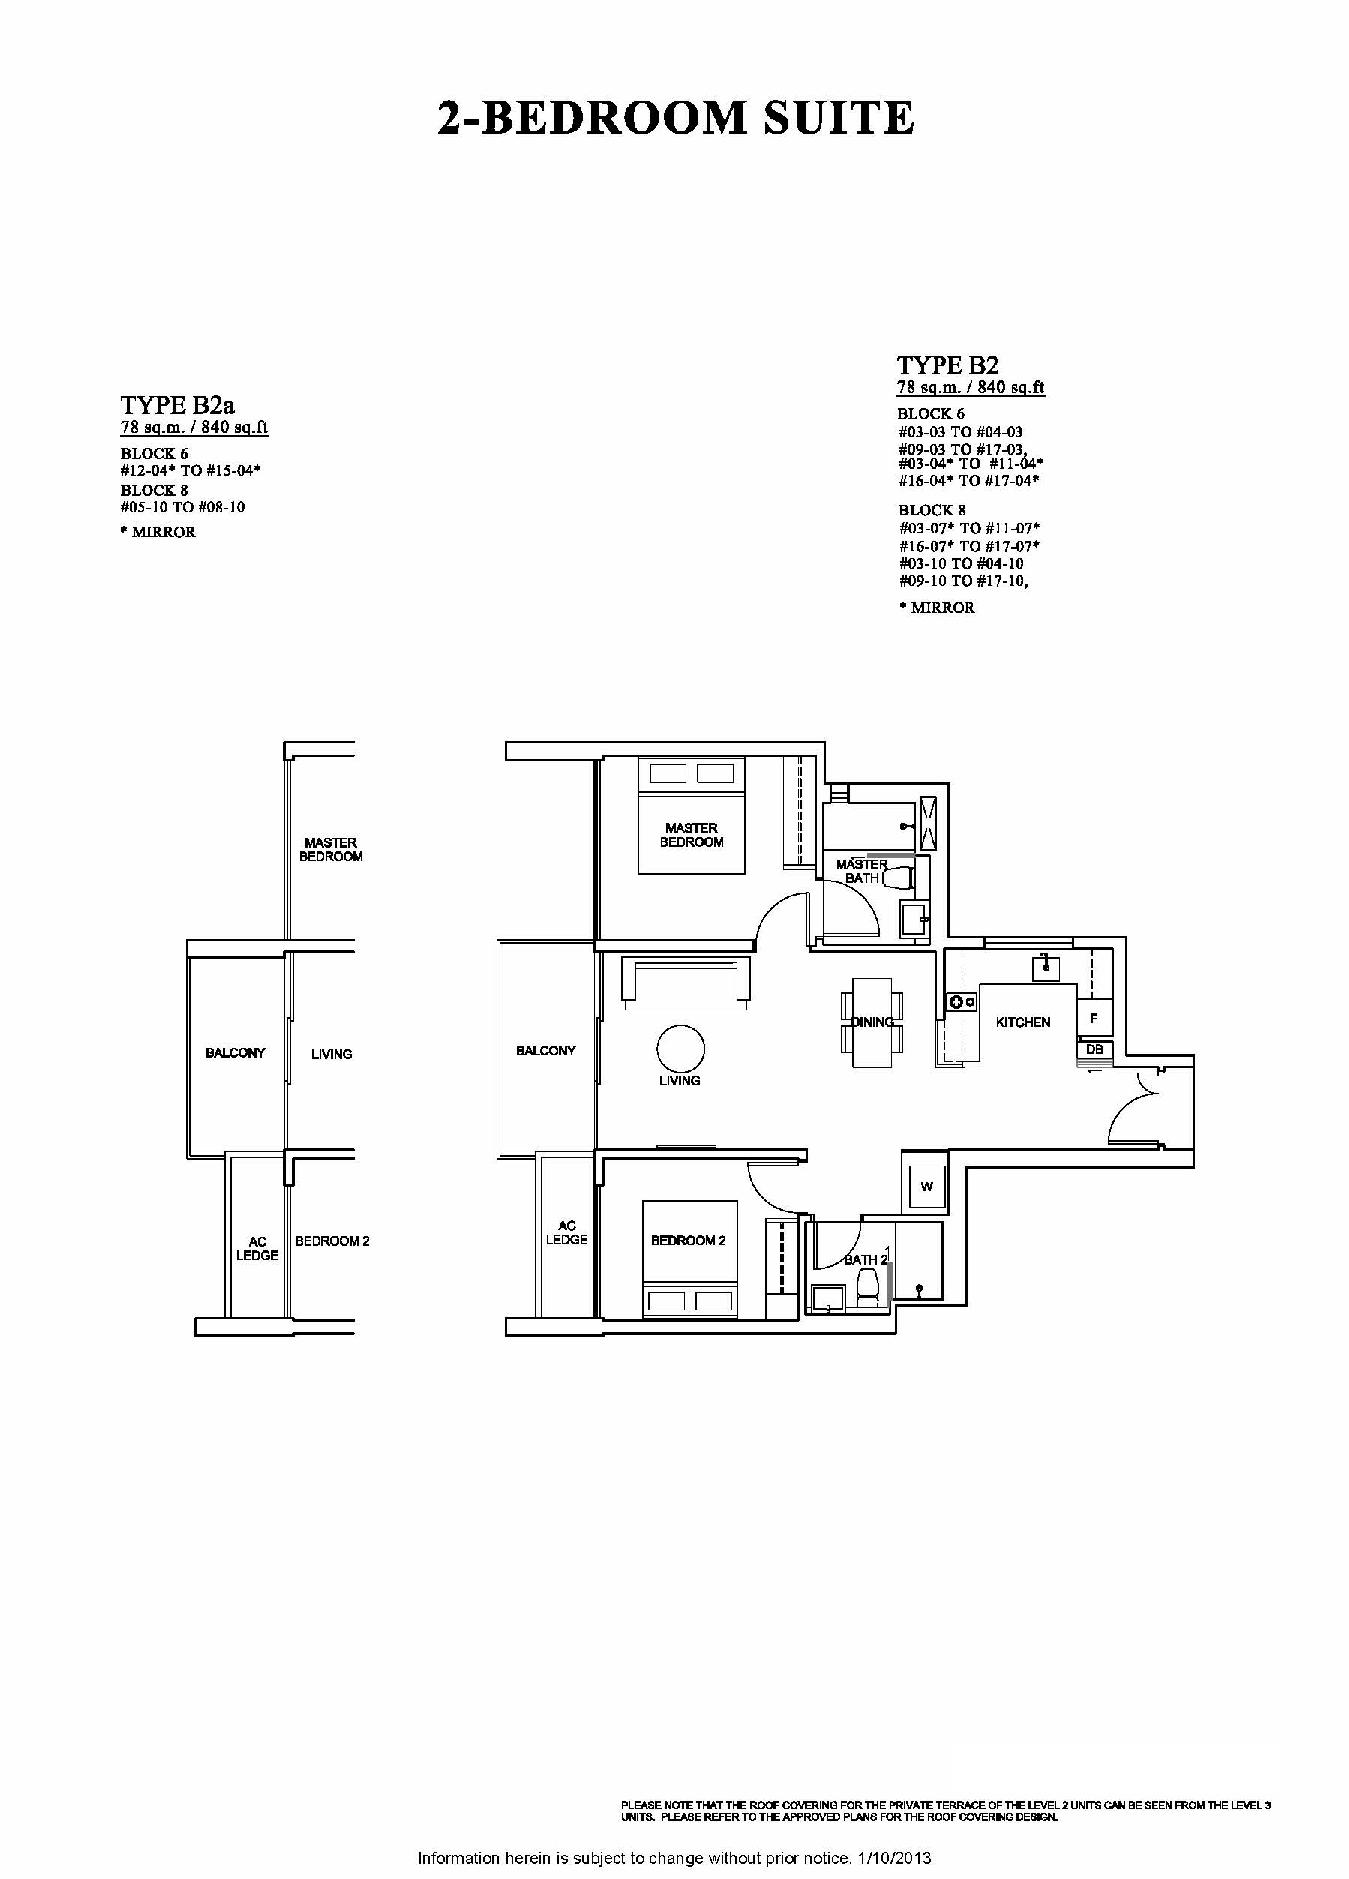 The Venue Residences 2 Bedroom Suite Floor Plan Type B2a and B2